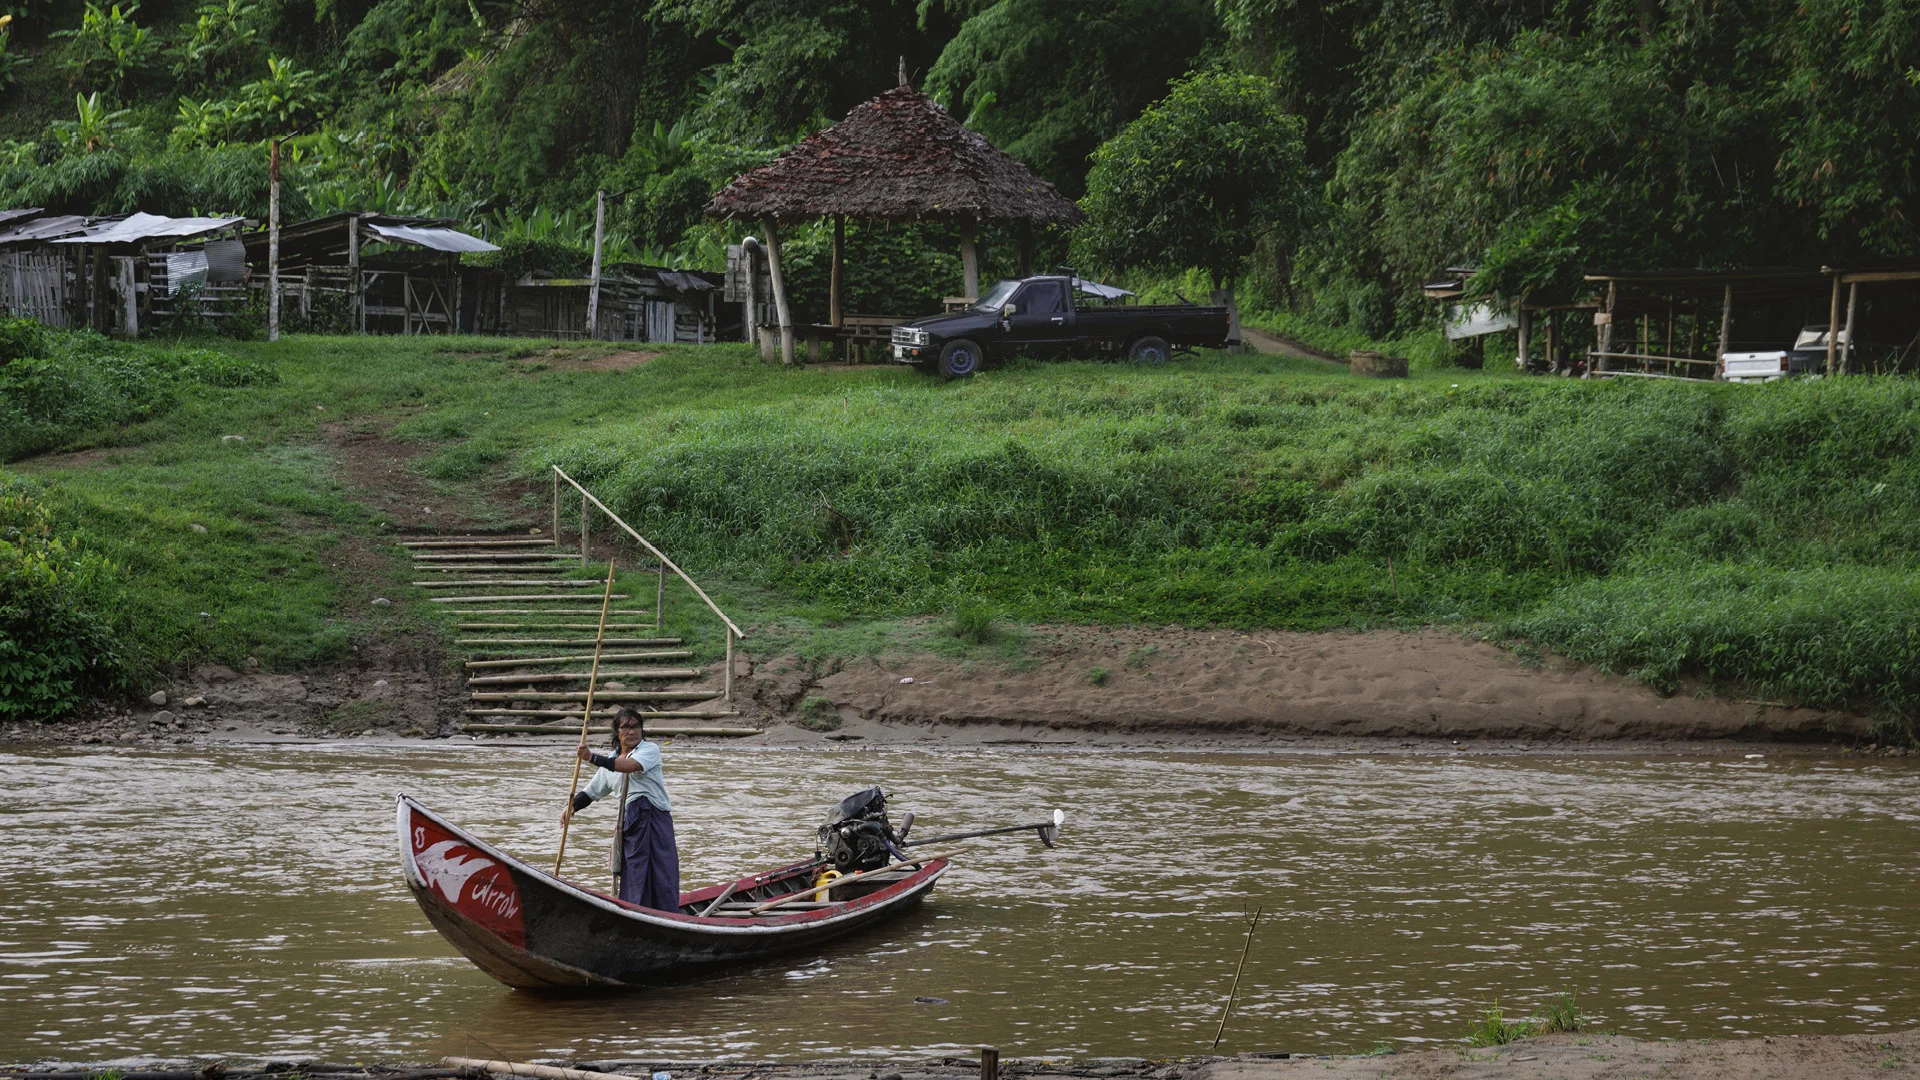 Boat on the Pai river in Huay Pu Keng, close to Mae Hong Son, Thailand